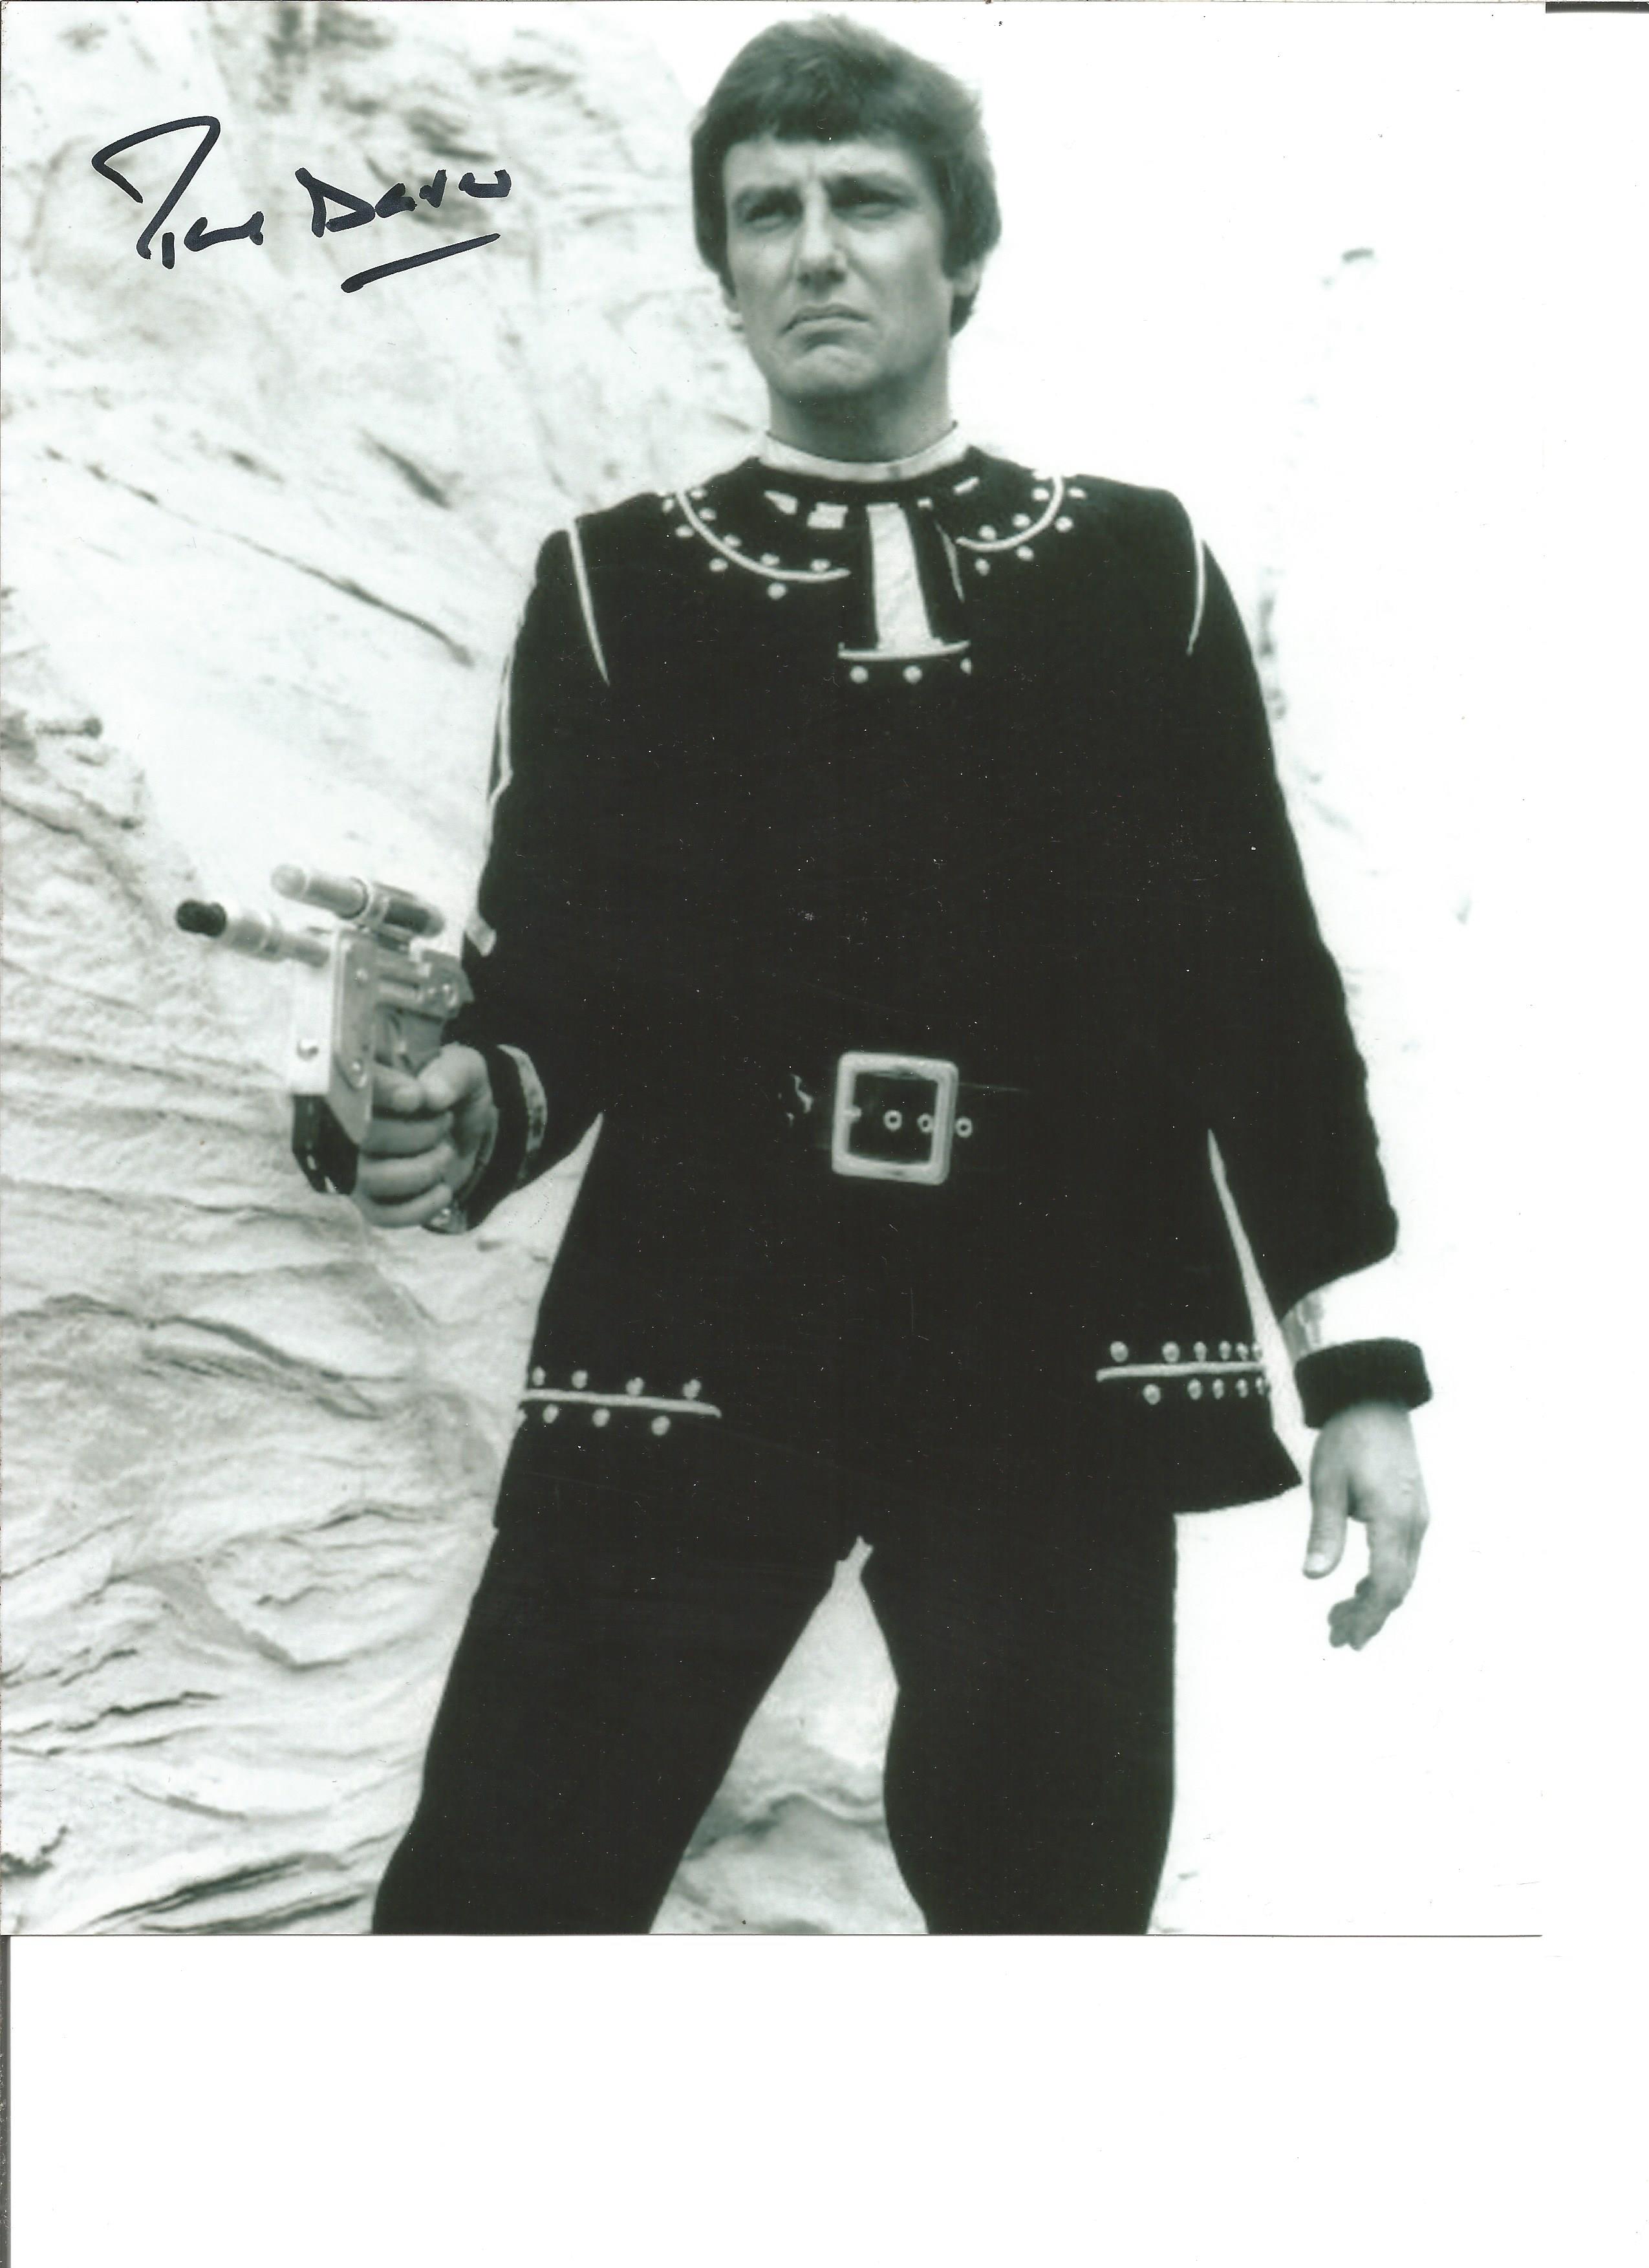 Blowout Sale! Paul Darrow (d) Blakes 7 hand signed 10x8 photo. This beautiful hand-signed photo